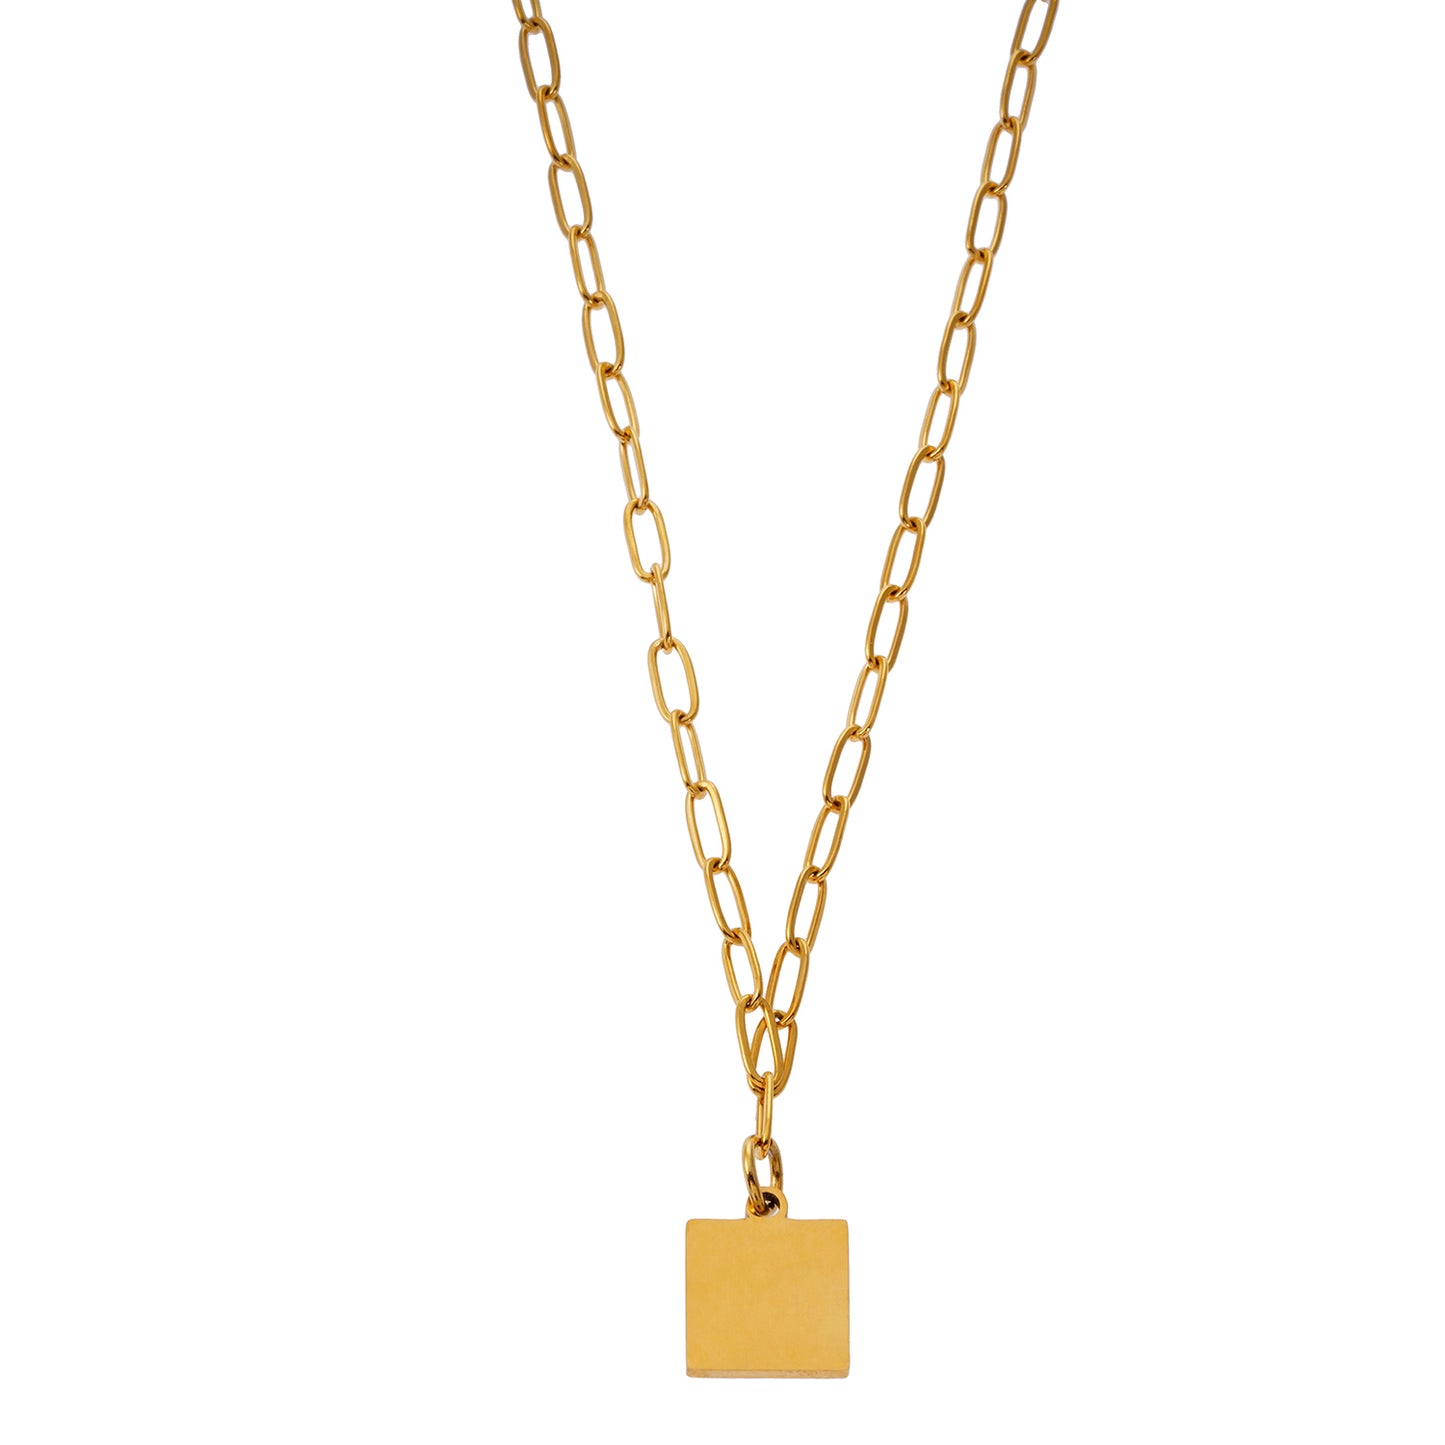 Style ANNABELLA 0092: Minimalist Metal & Shell Square Pendant on a Paper-Clip Chain Necklace.